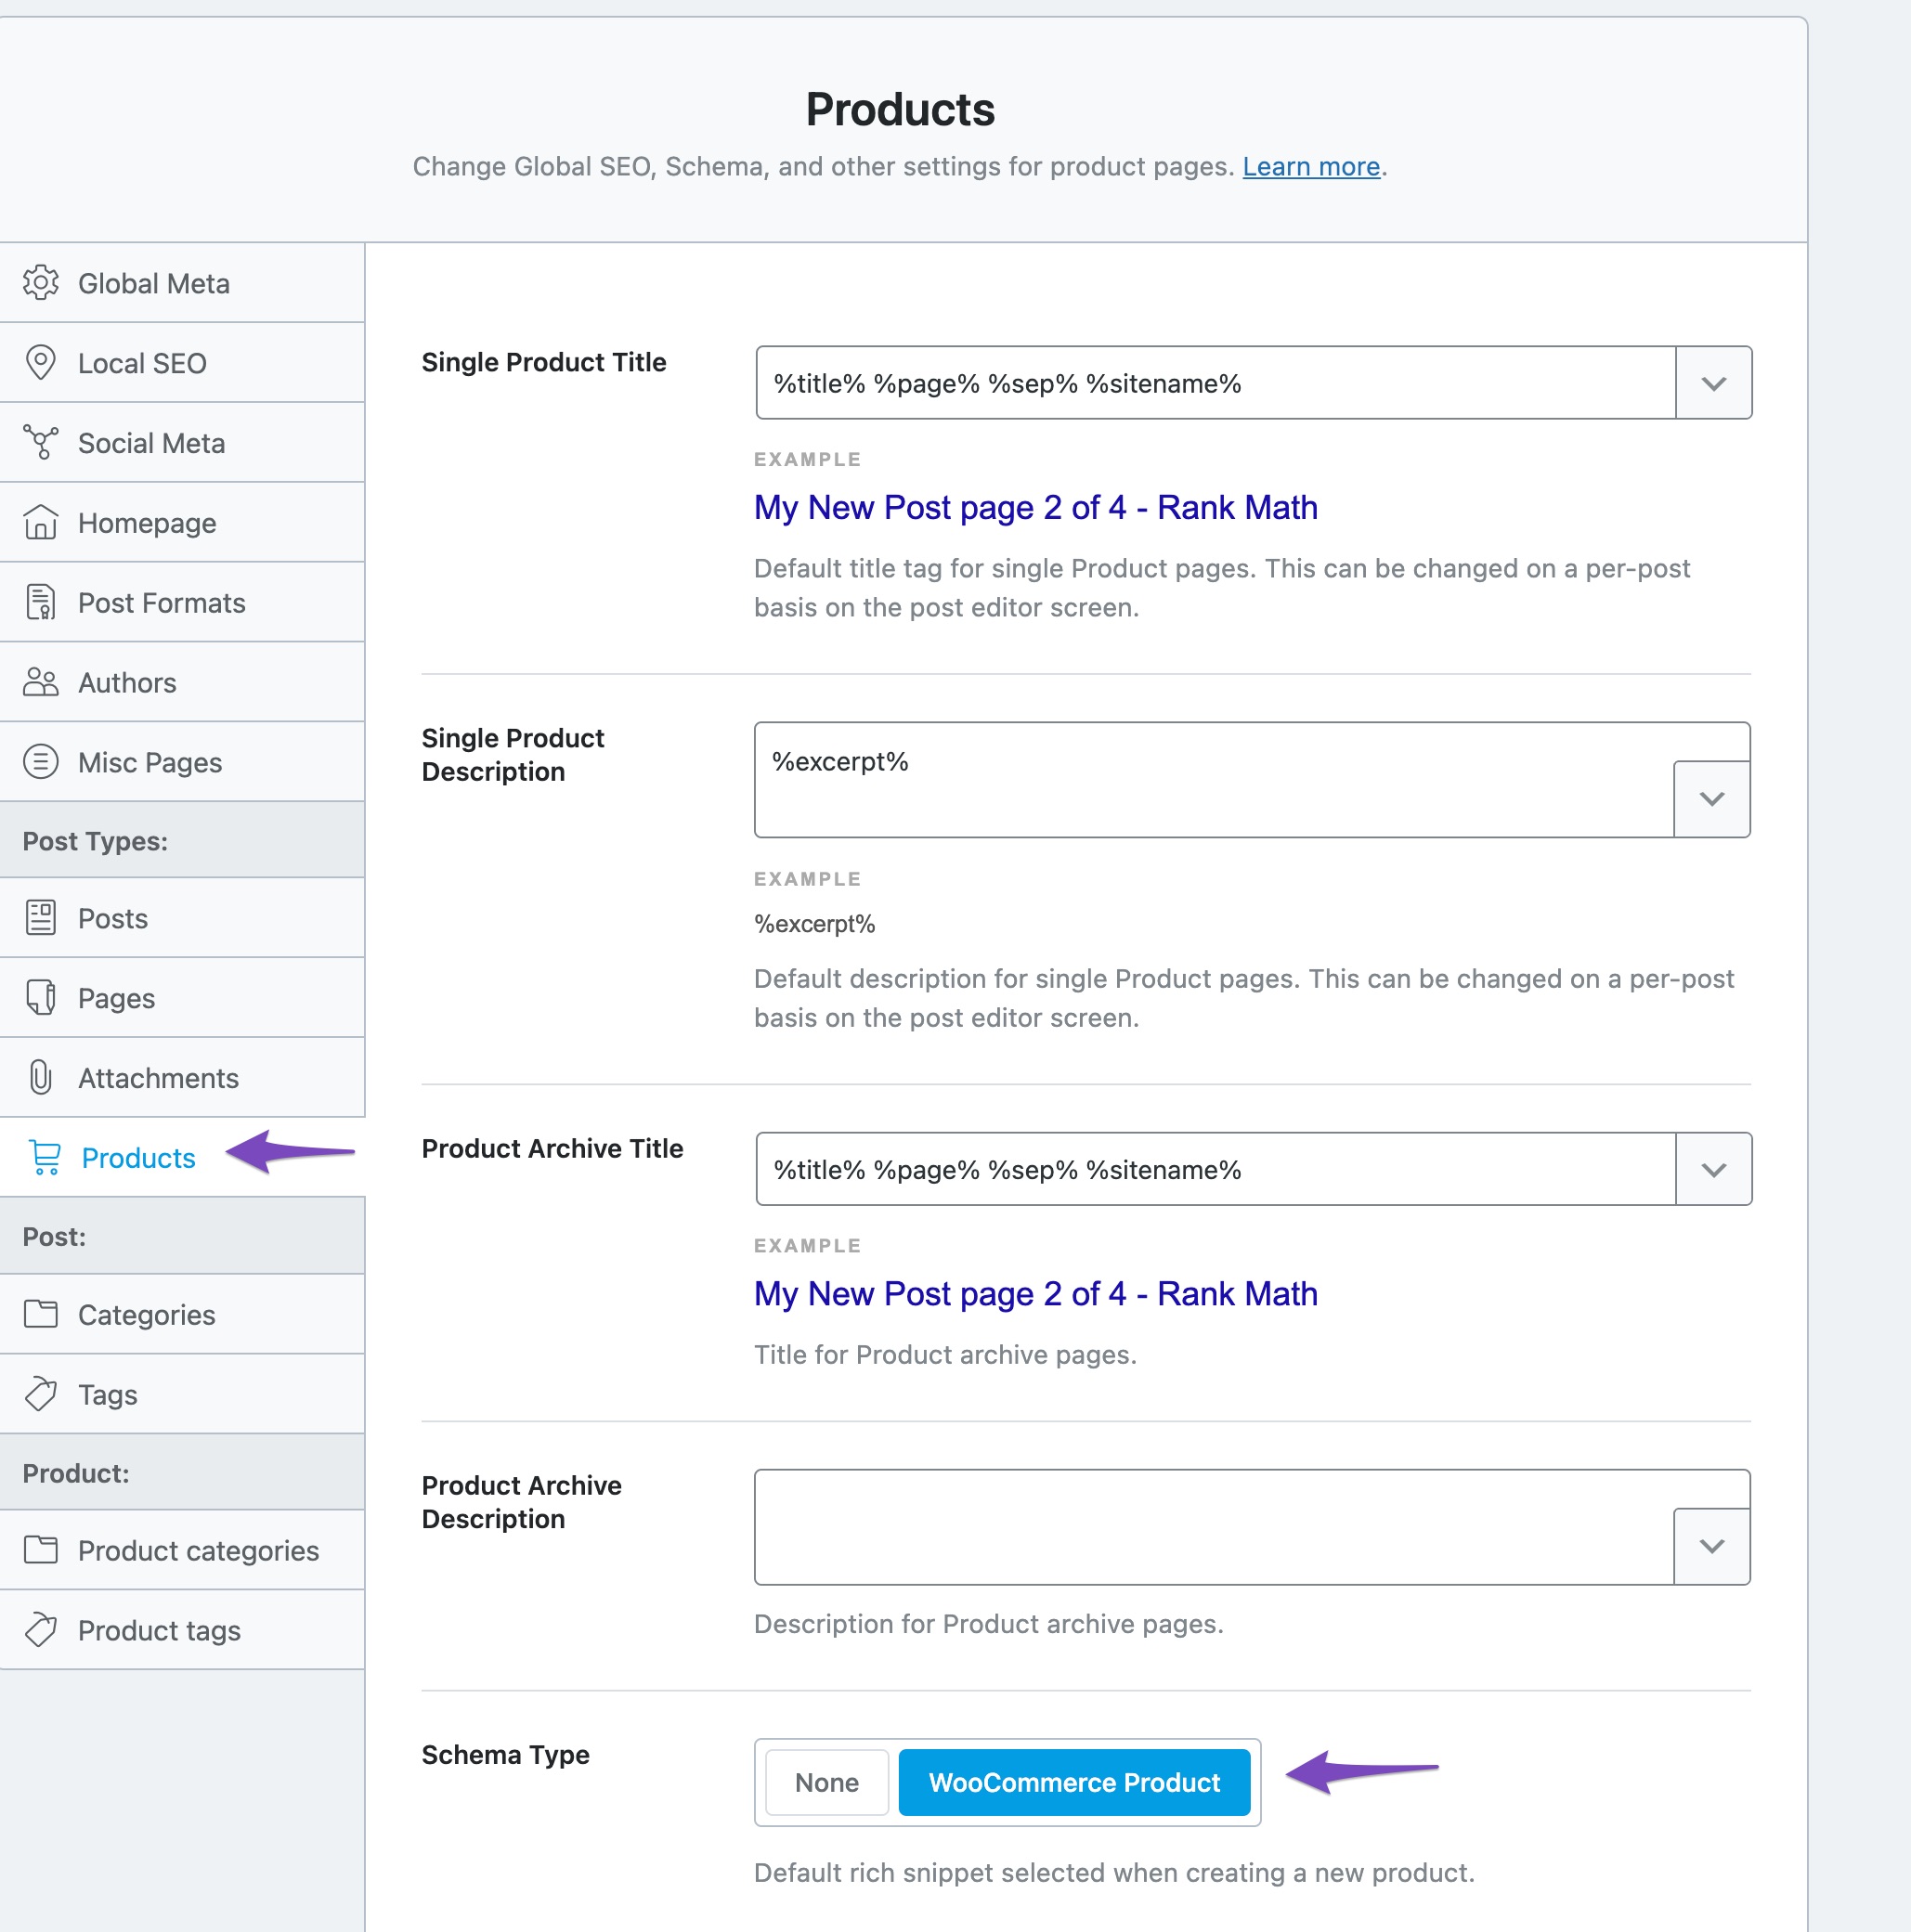 Enable WooCommerce Product Schema